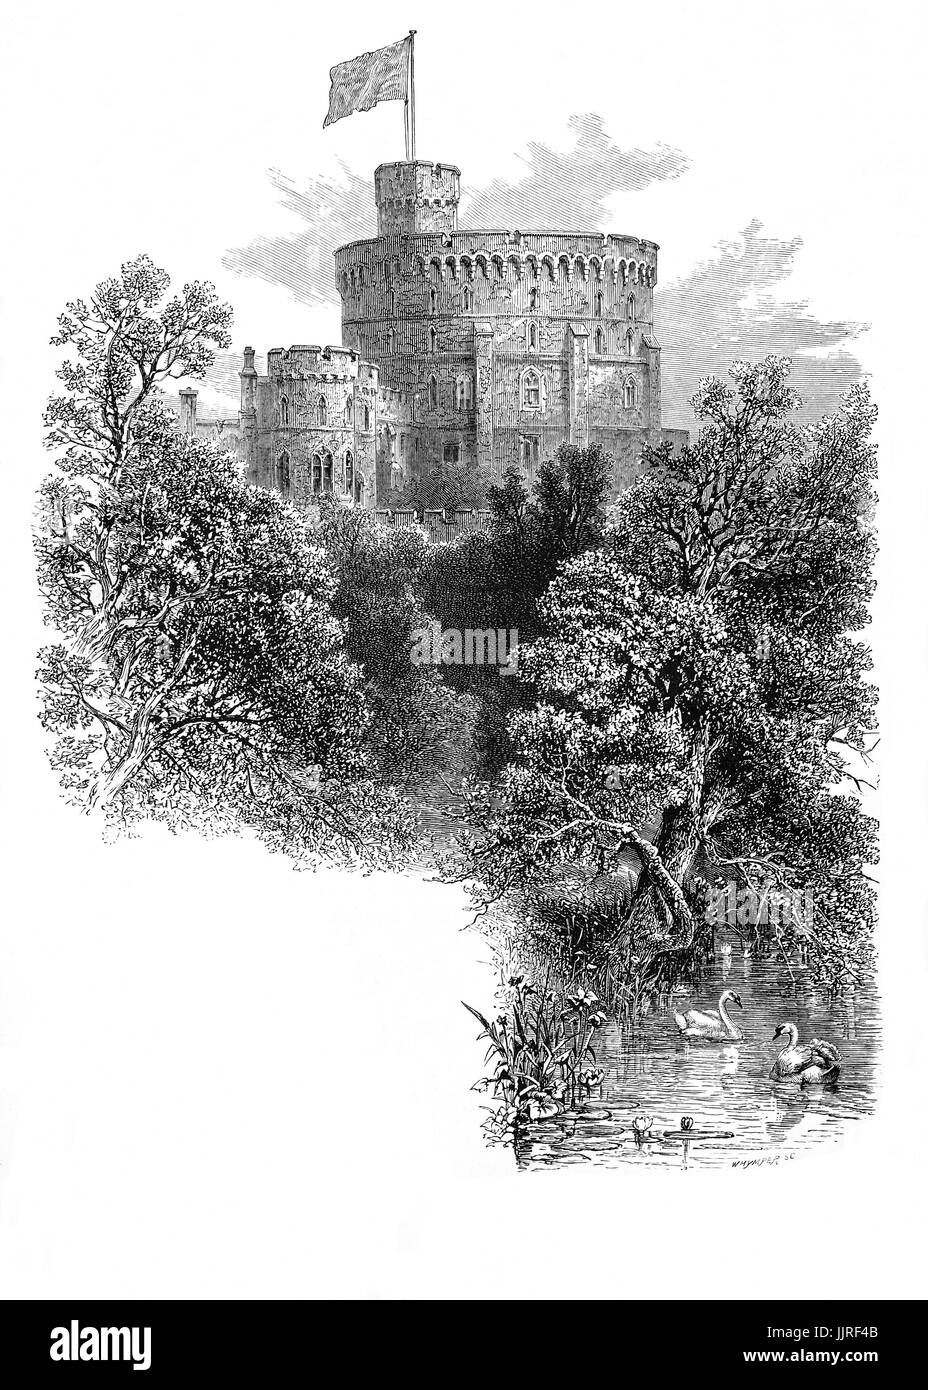 1870: The Round Tower, built by Henry II  in 1170. It replaced a wooden Norman keep which was part of the Windsor Castle constructed by William the Conqueror from 1070-86. Windsor, Berkshire, England Stock Photo